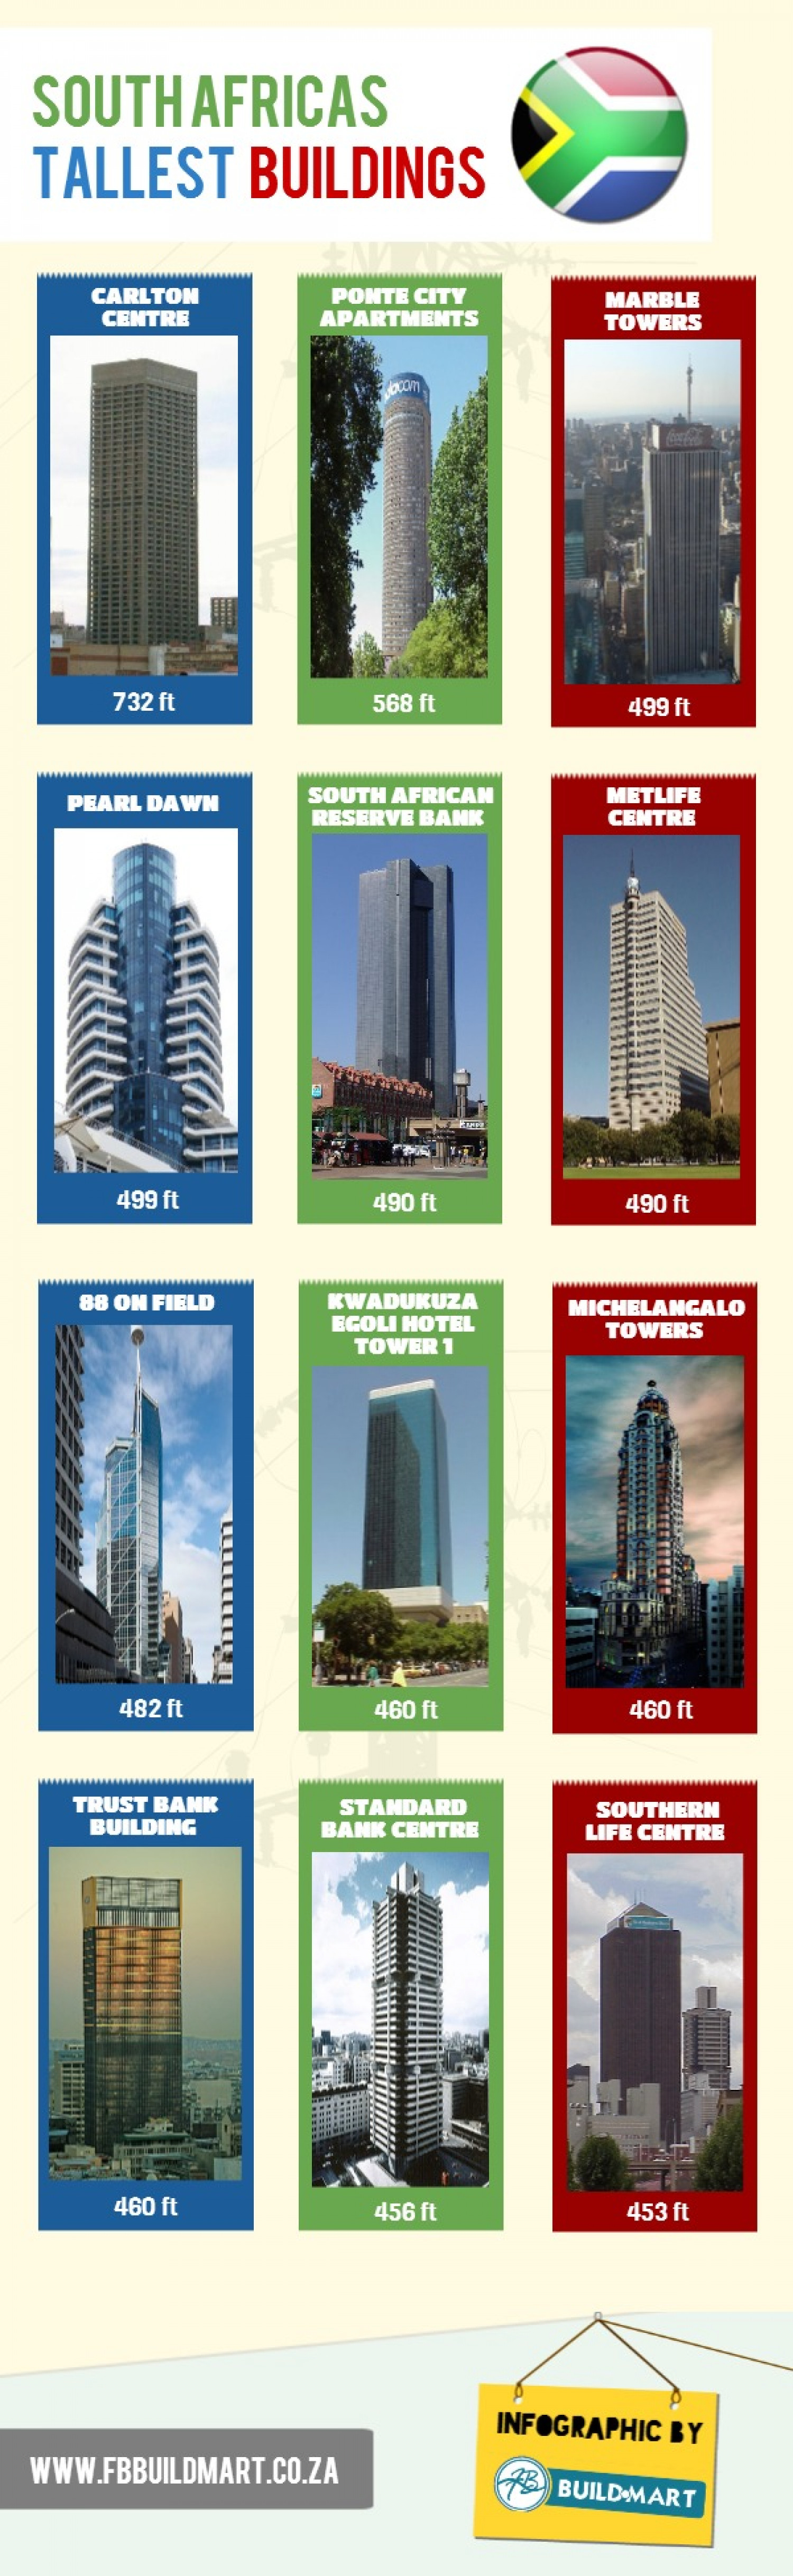 South Africas Largest Buildings Infographic